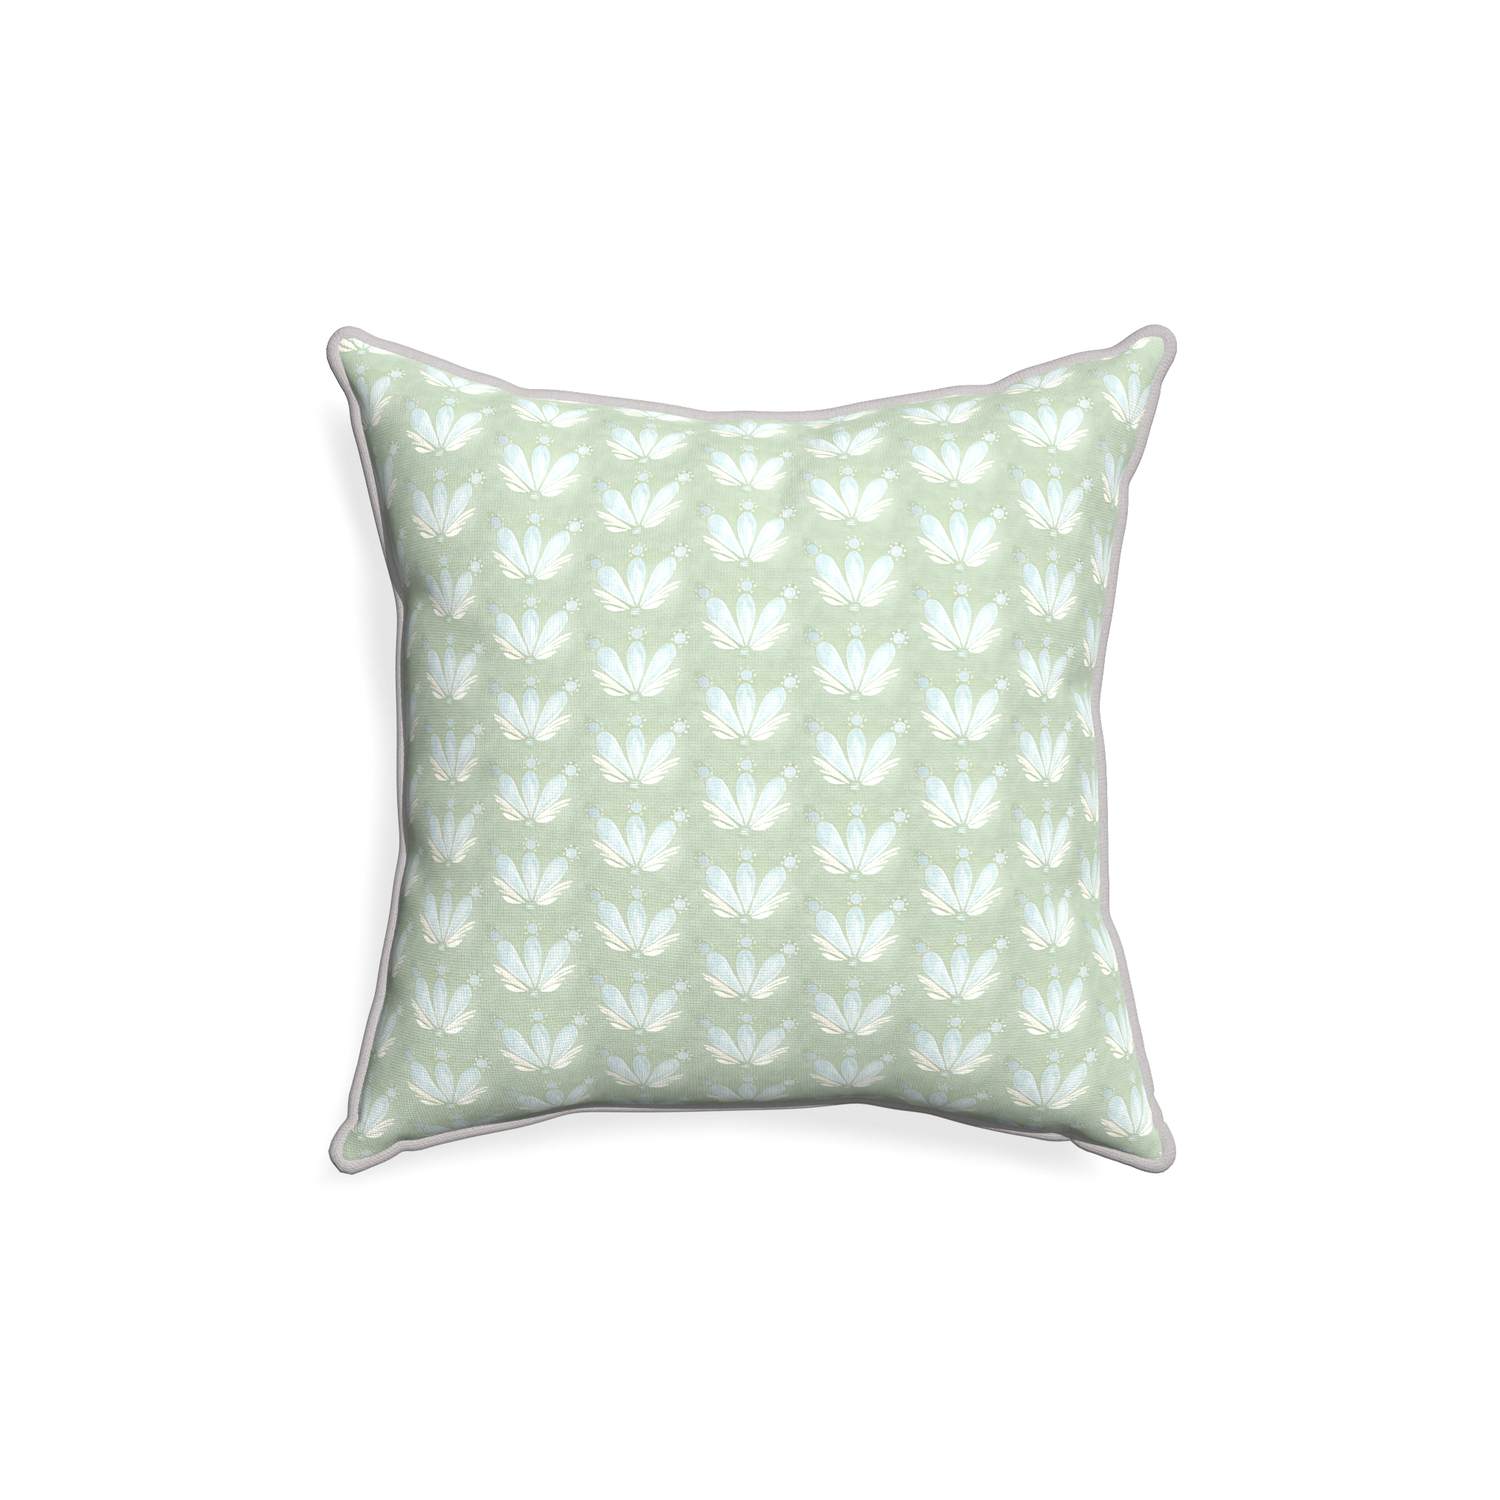 18-square serena sea salt custom blue & green floral drop repeatpillow with pebble piping on white background